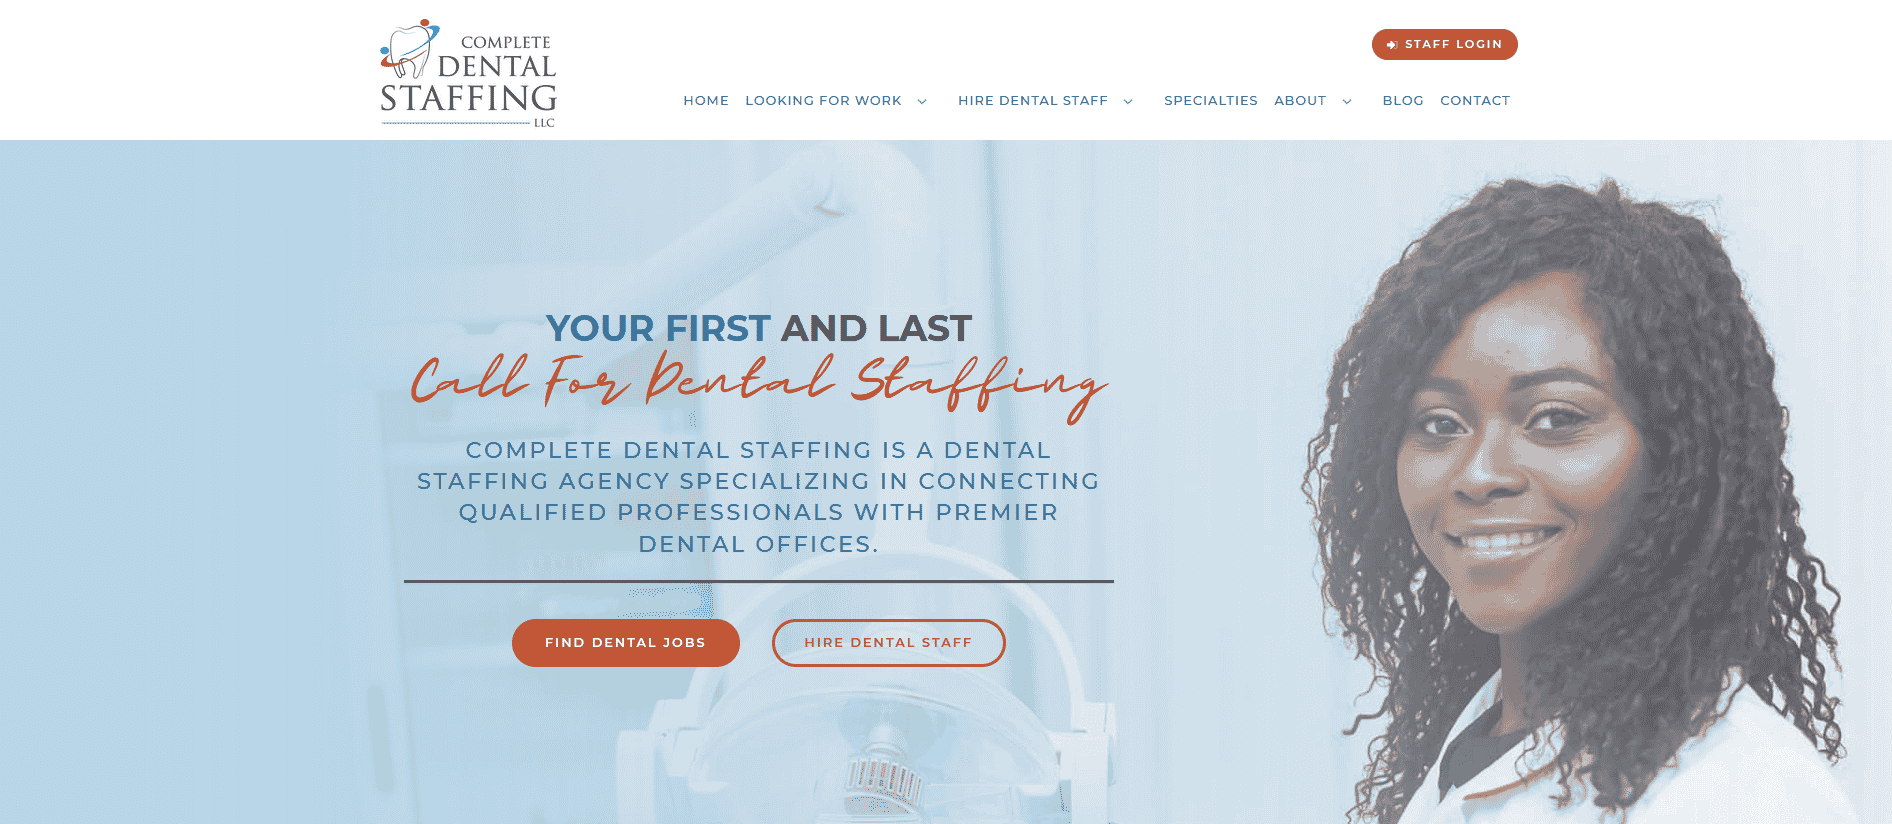 Complete Dental Staffing’s New Website Will Make You Smile